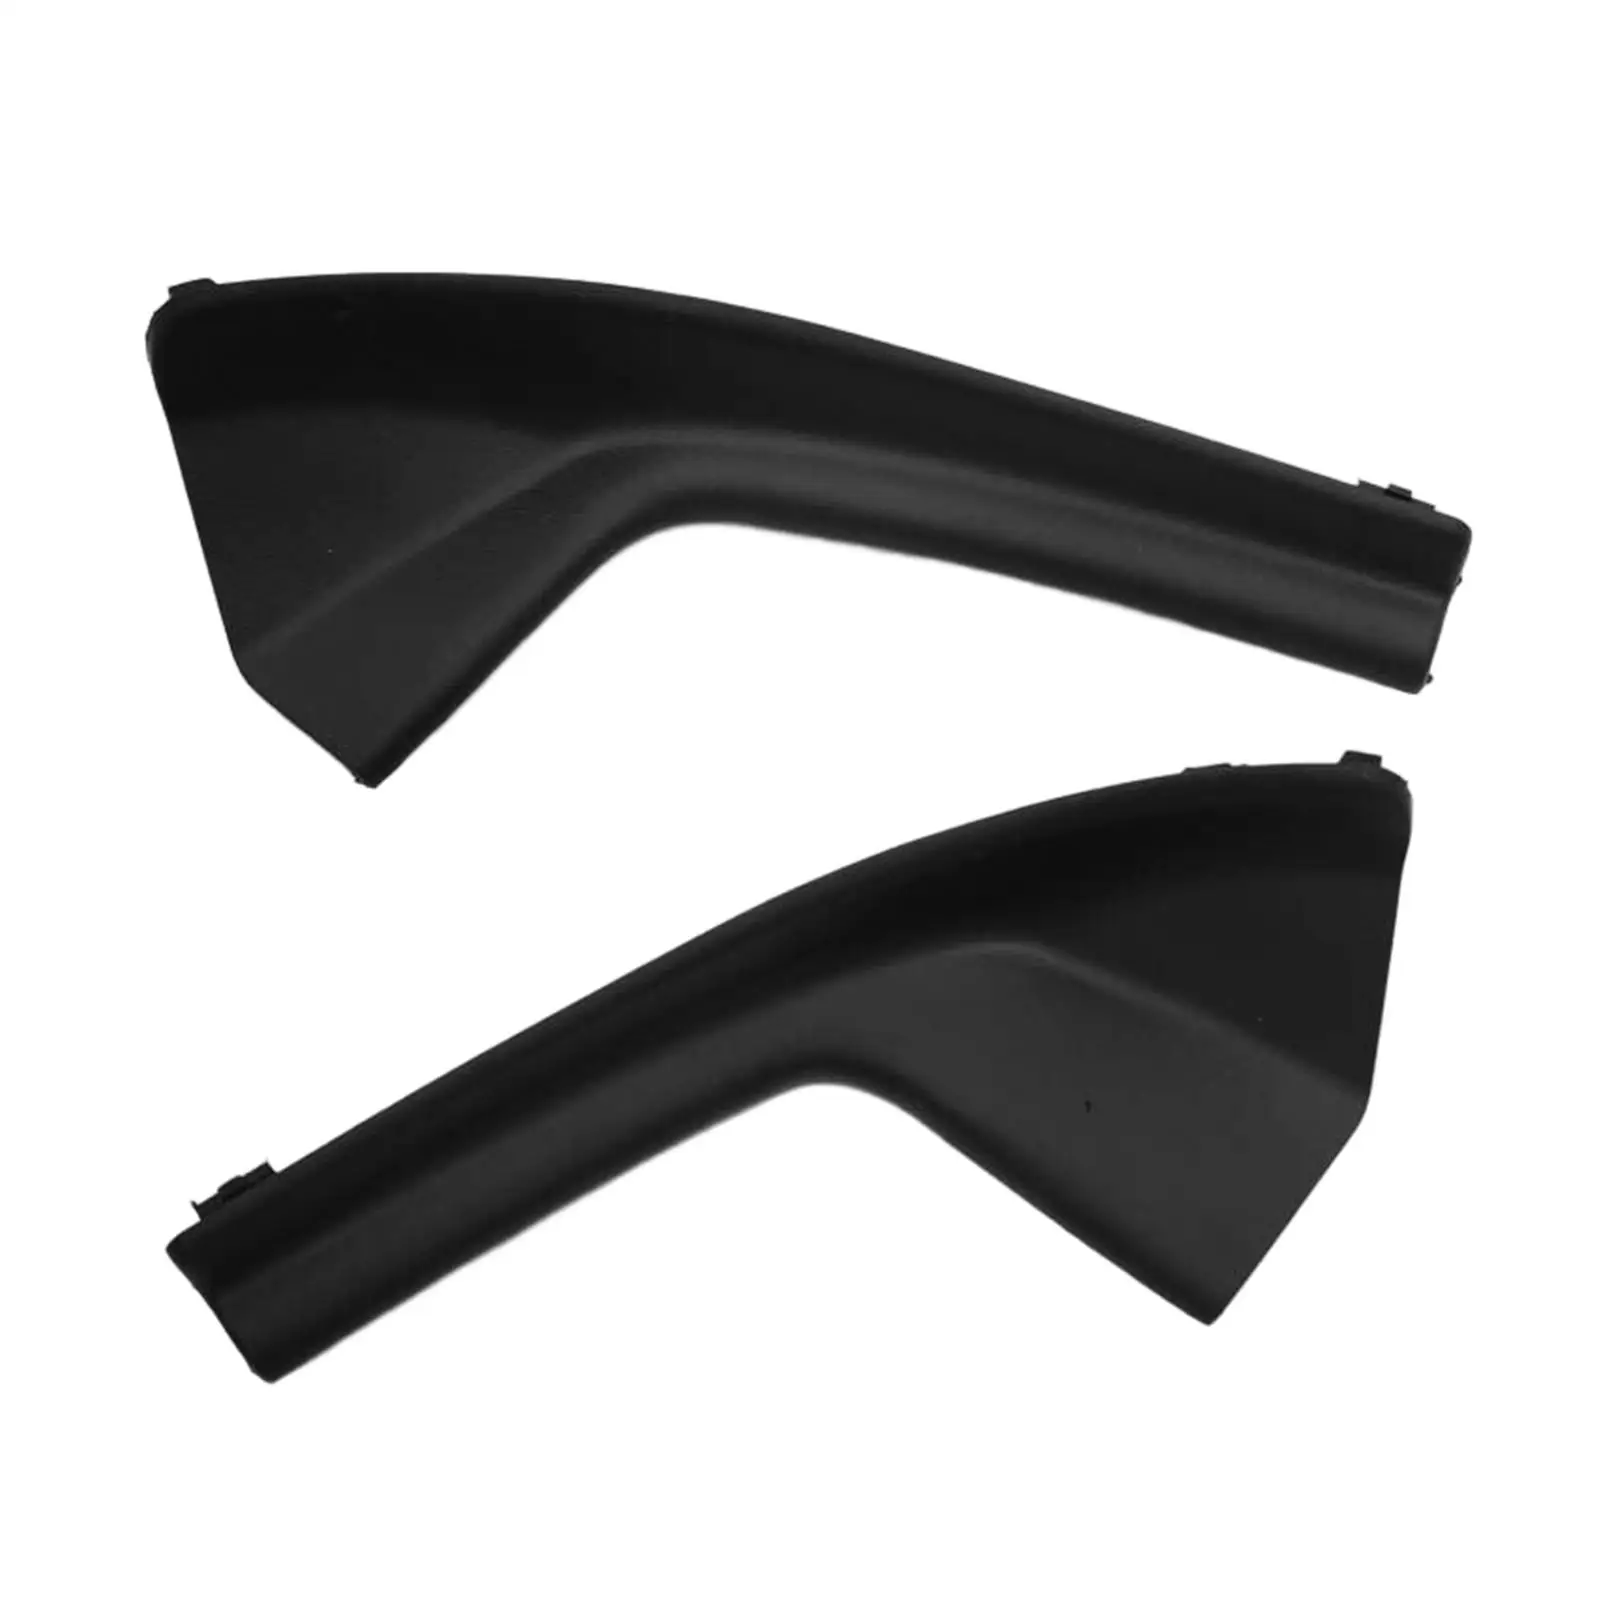 2 Pieces Front Windshield Wiper Side Cowl Extension Trim Cover 66895-ed50A 66894-ed500 Left Right for Nissan Versa Sedan